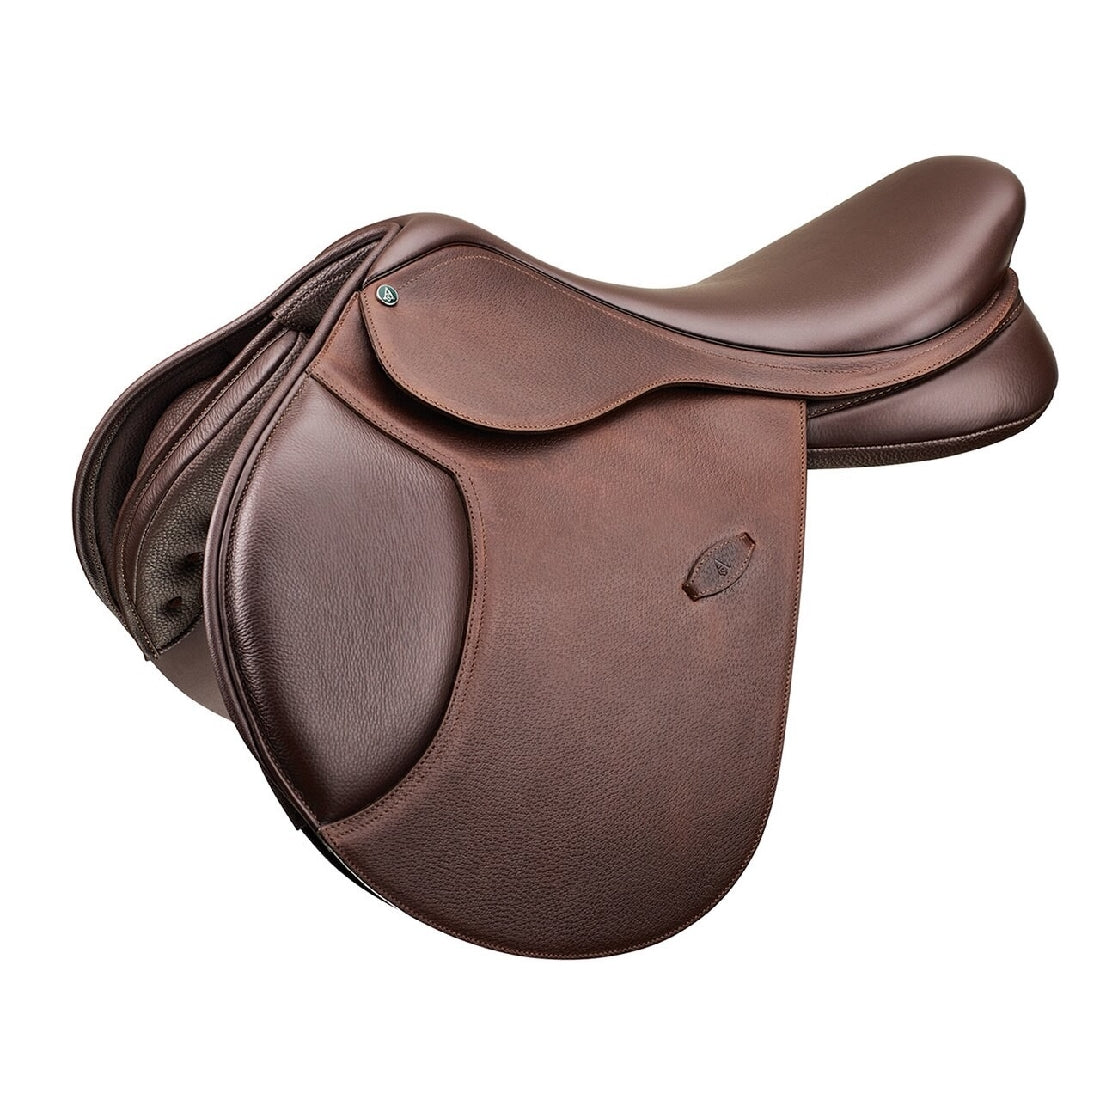 Brown Arena Saddles horse saddle isolated on a white background.